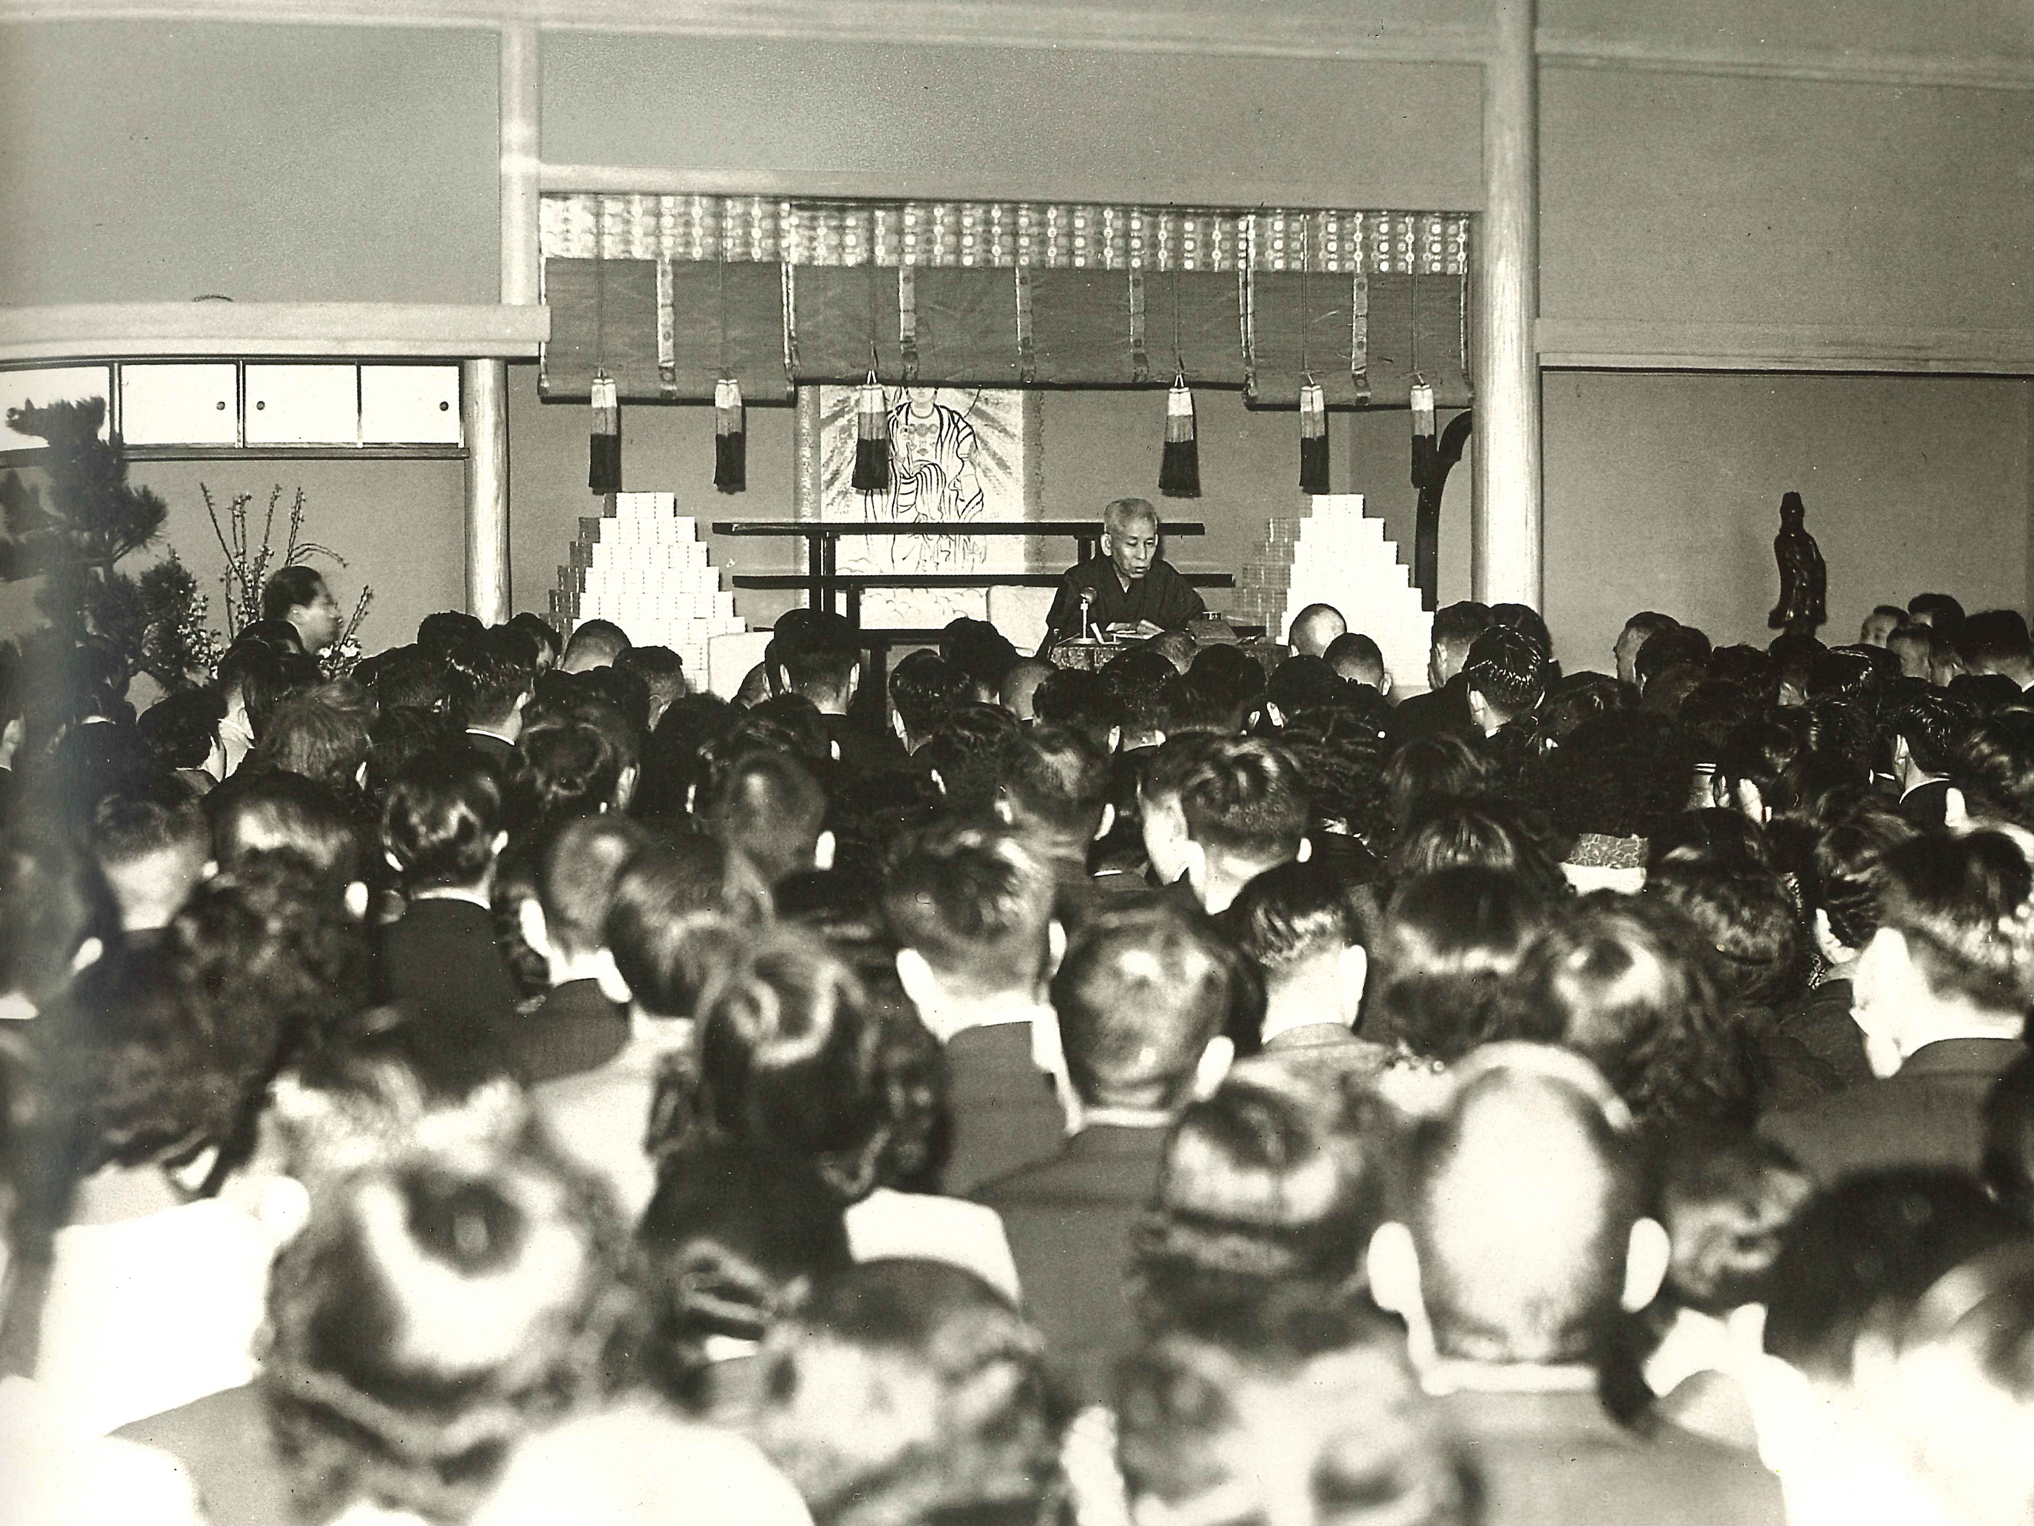 Member’s meeting with Meishu-sama at Sakimicho Temporary Headquarters in Atami (March 1951)